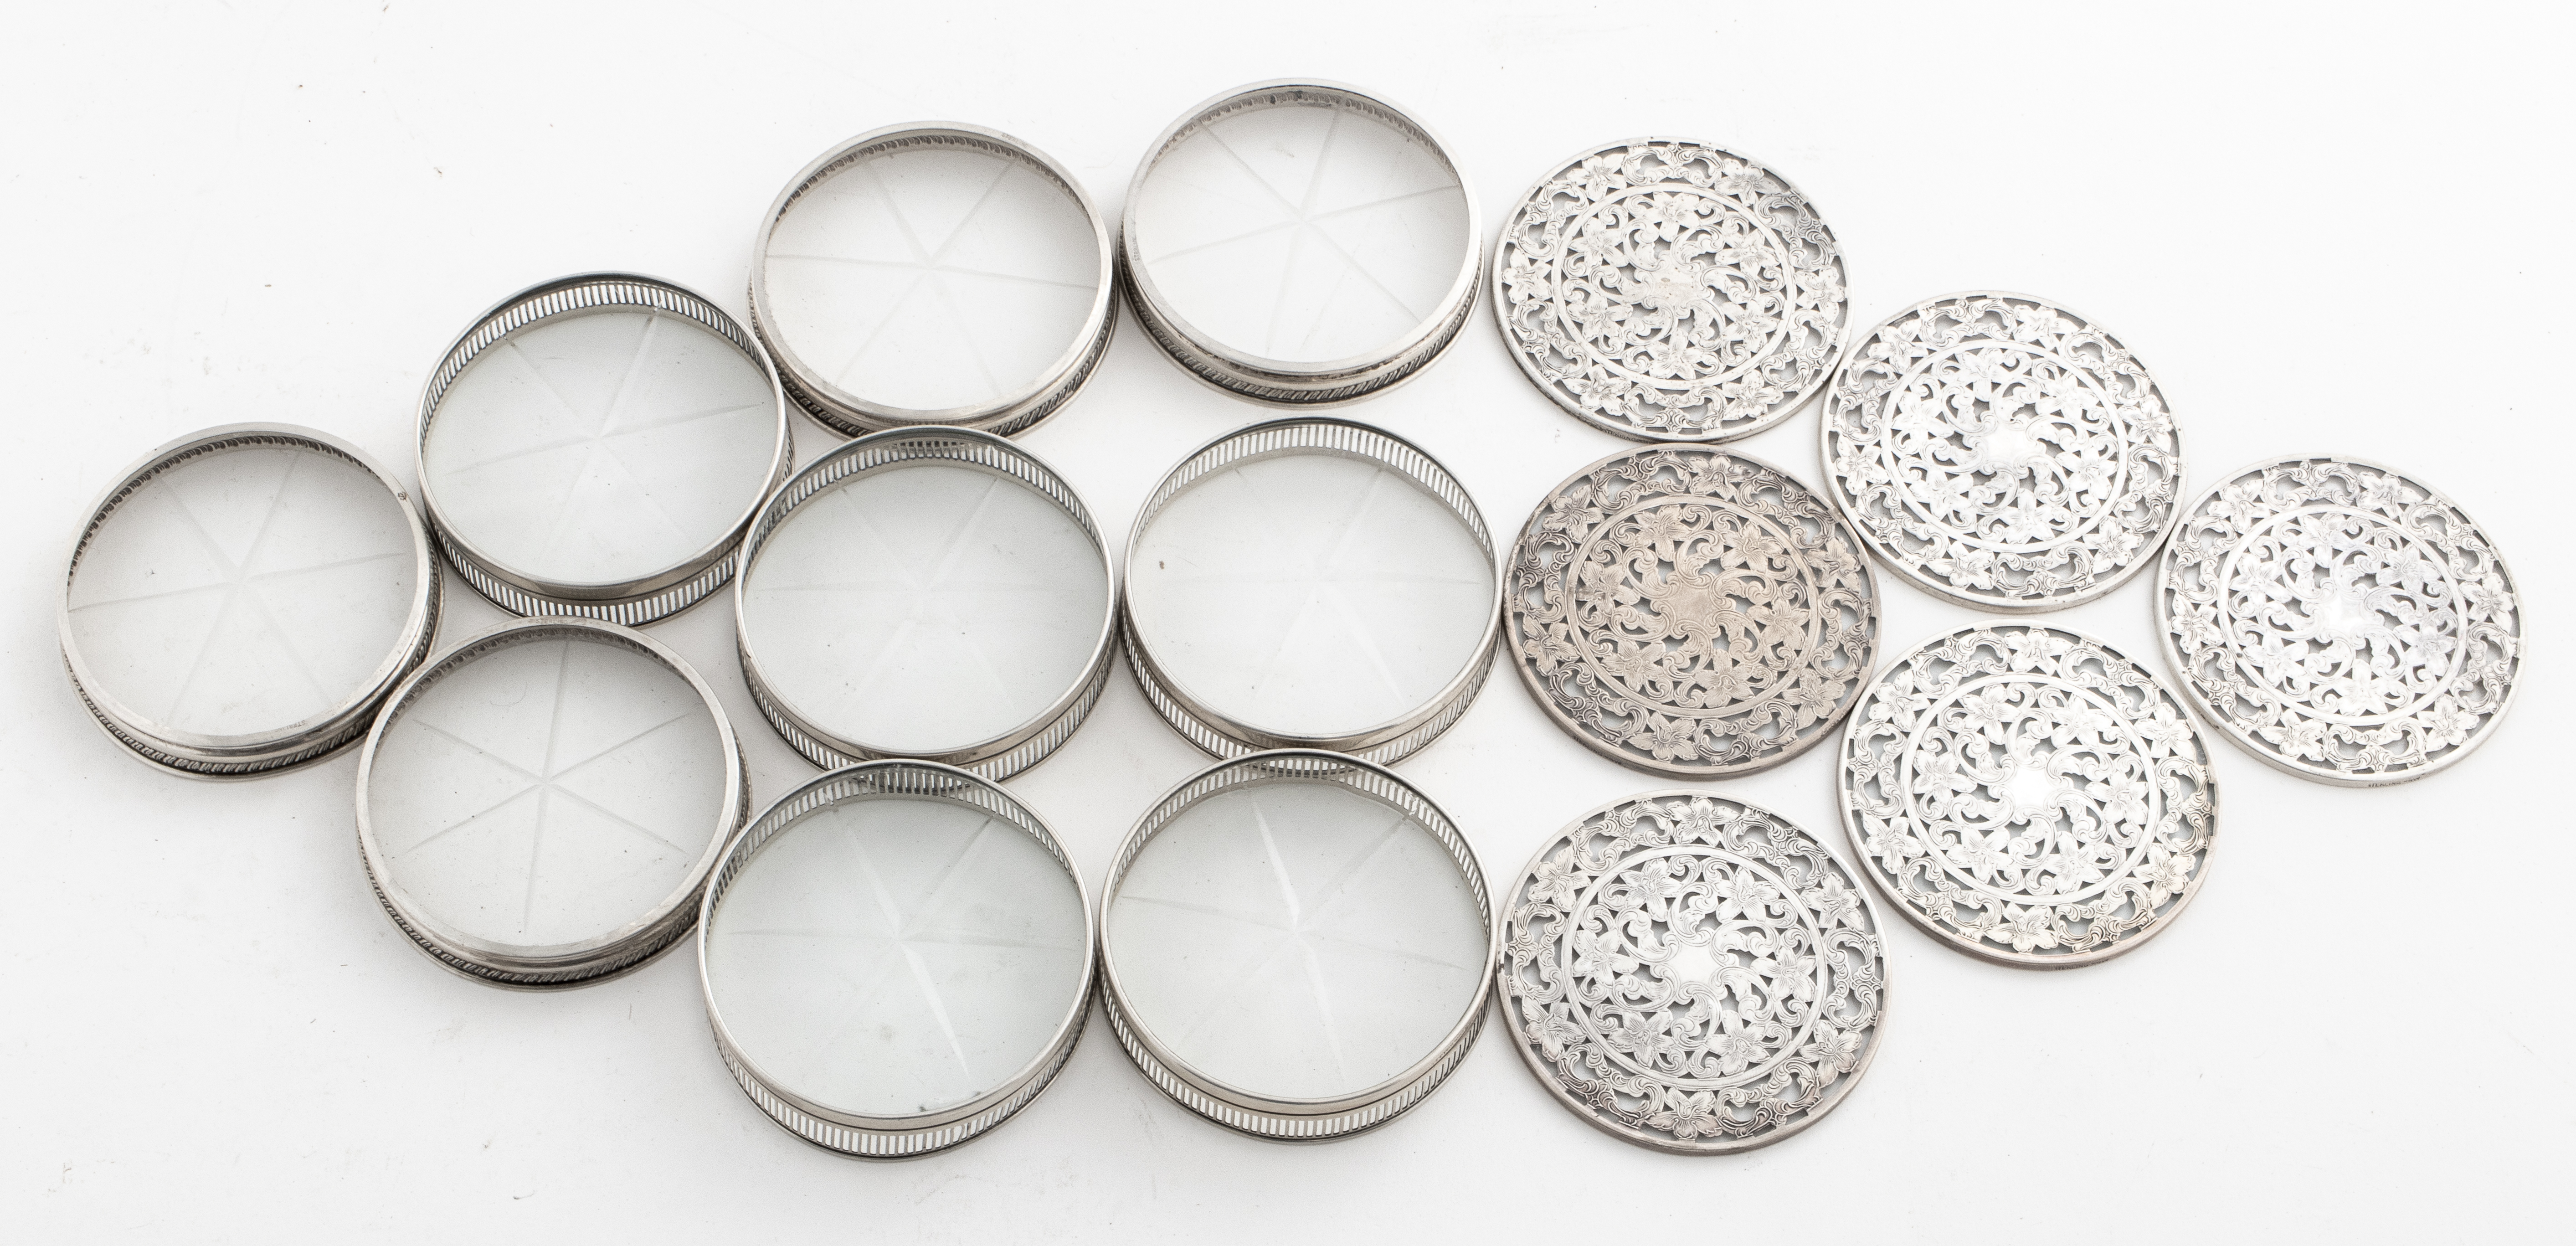 SILVER GLASS COASTERS ASSEMBLED 3c5296